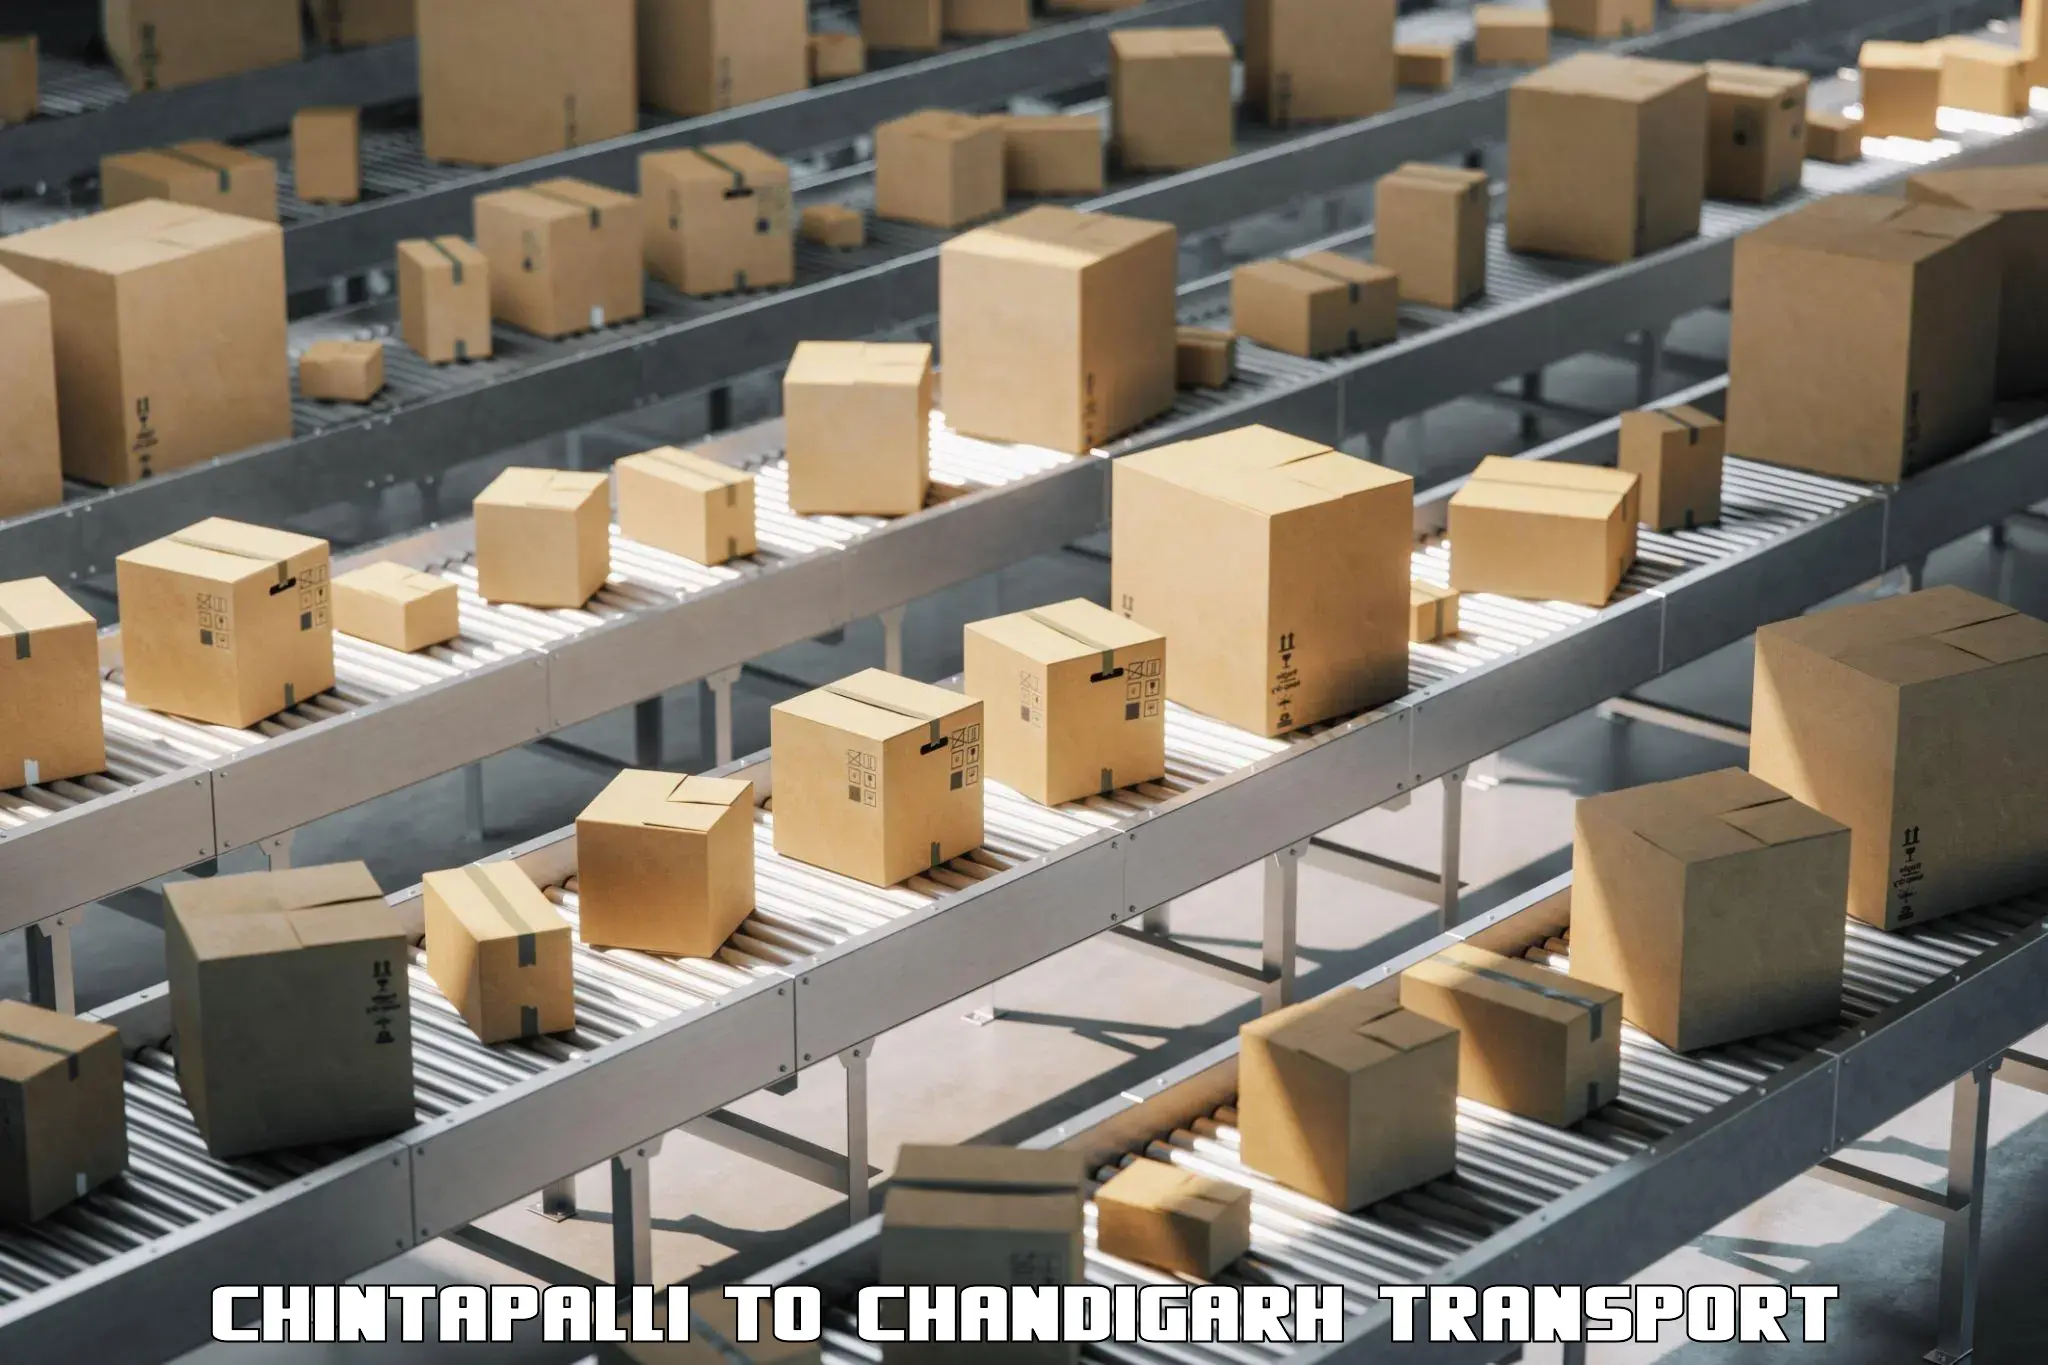 Container transport service Chintapalli to Chandigarh